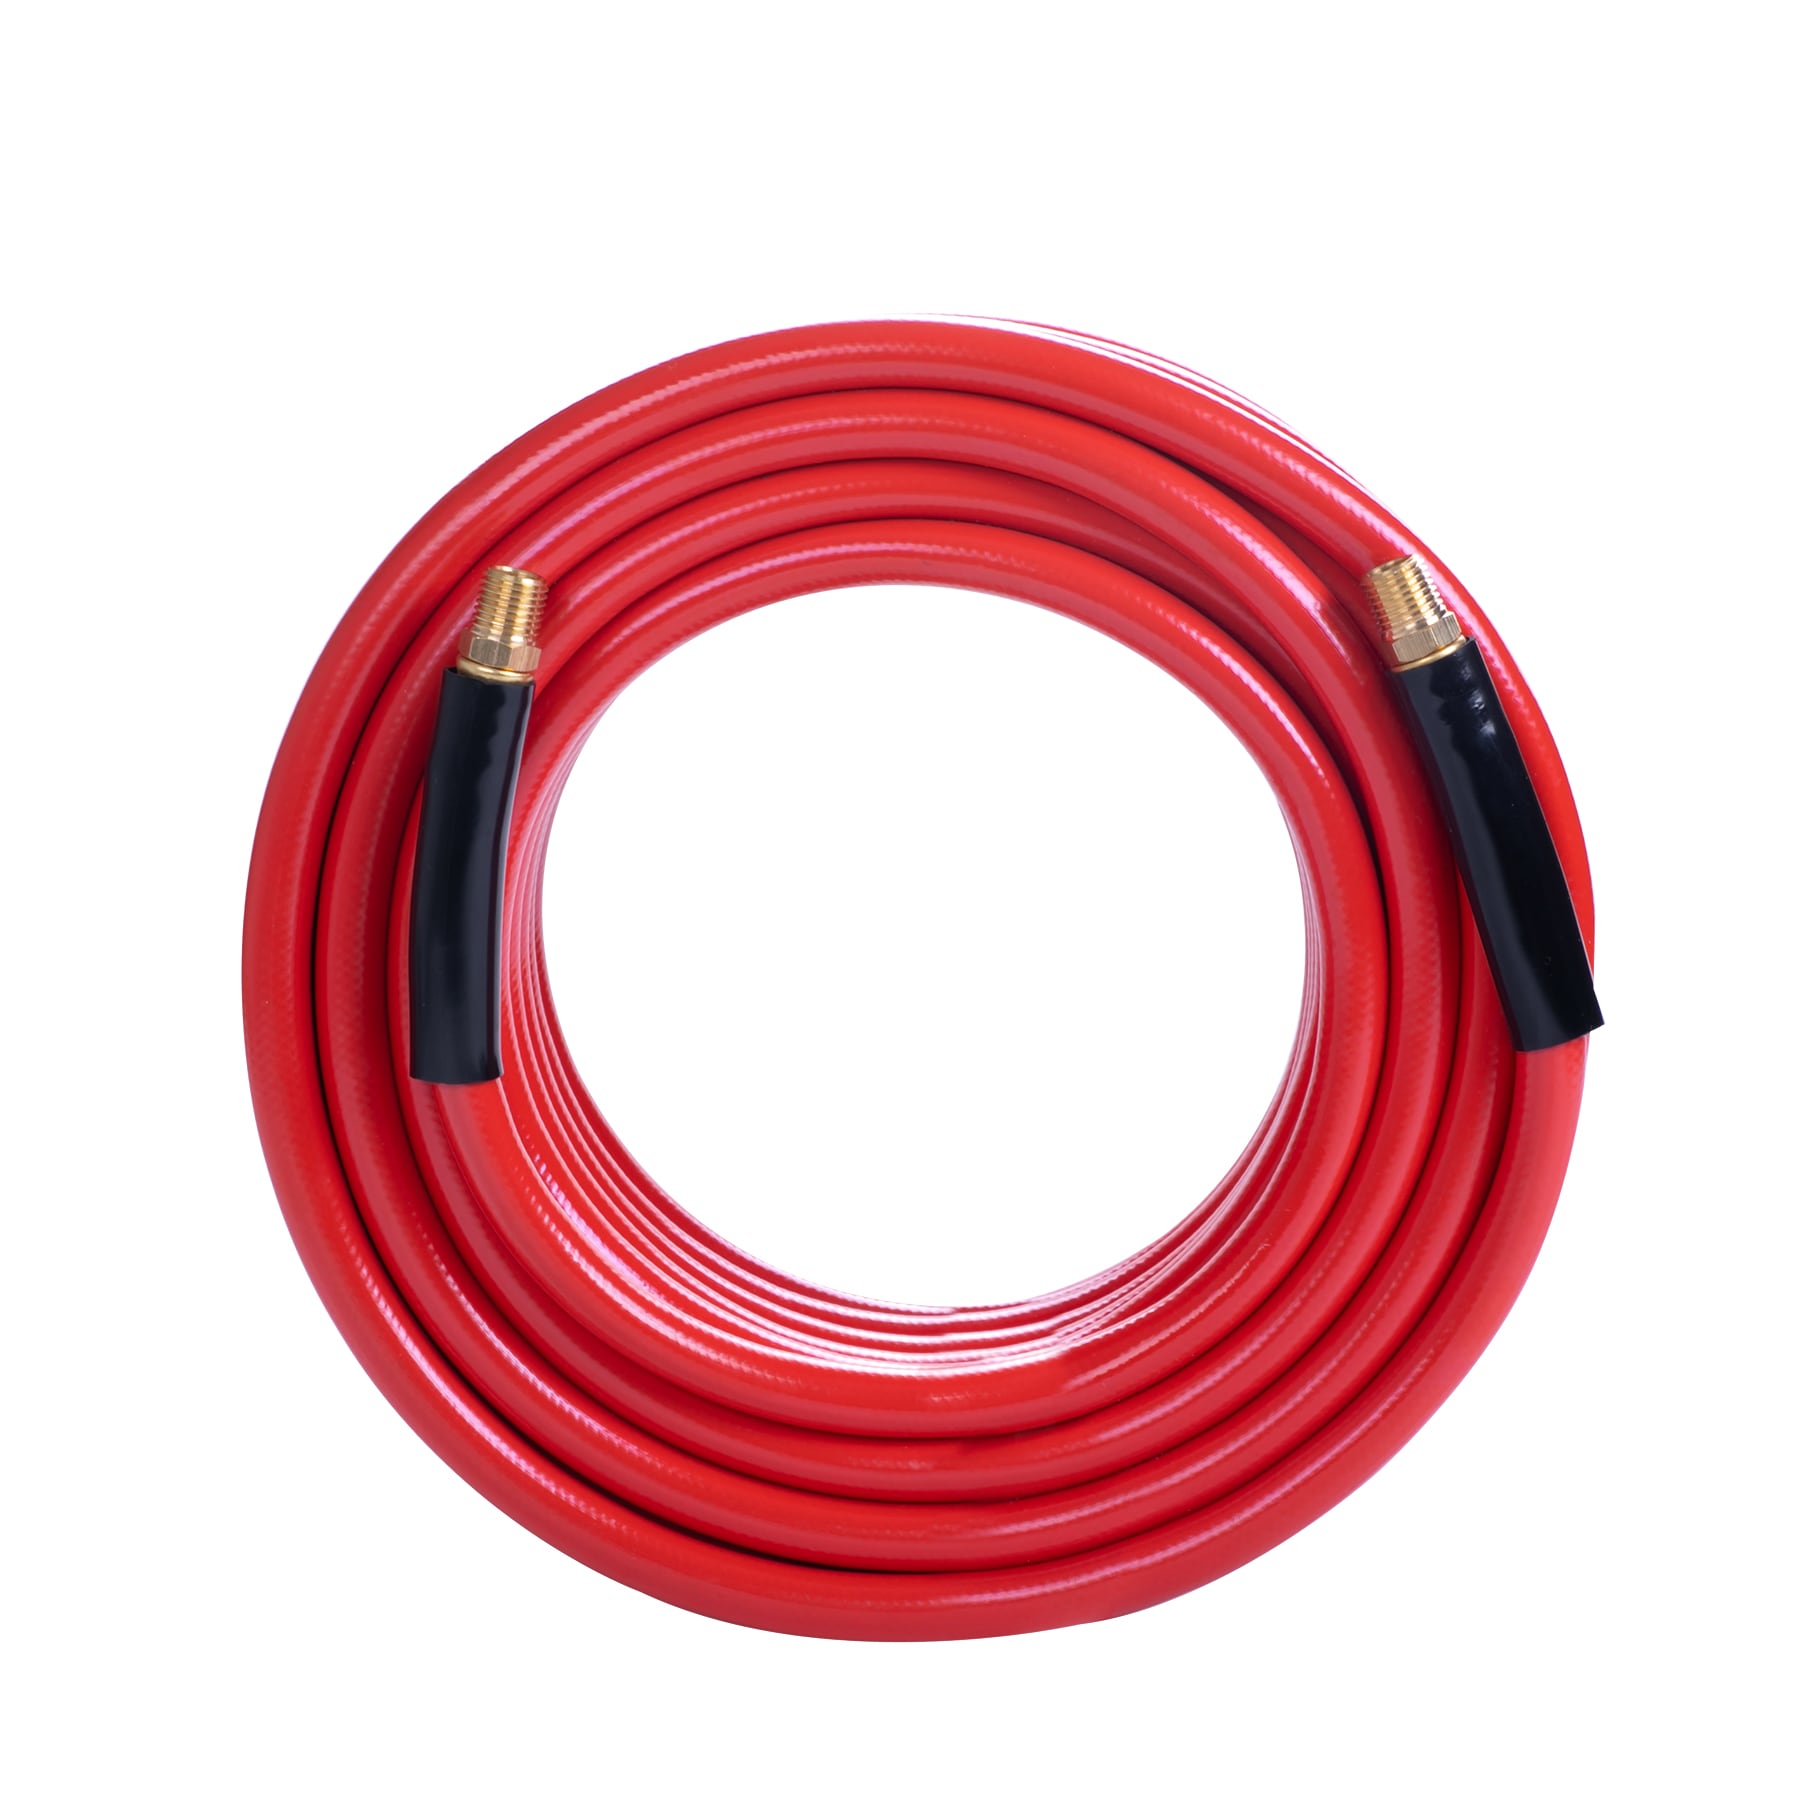 3/4 inch x 100 ft Red Rubber Air Hose with 3/4 Male Pipe Ends (npt thread)